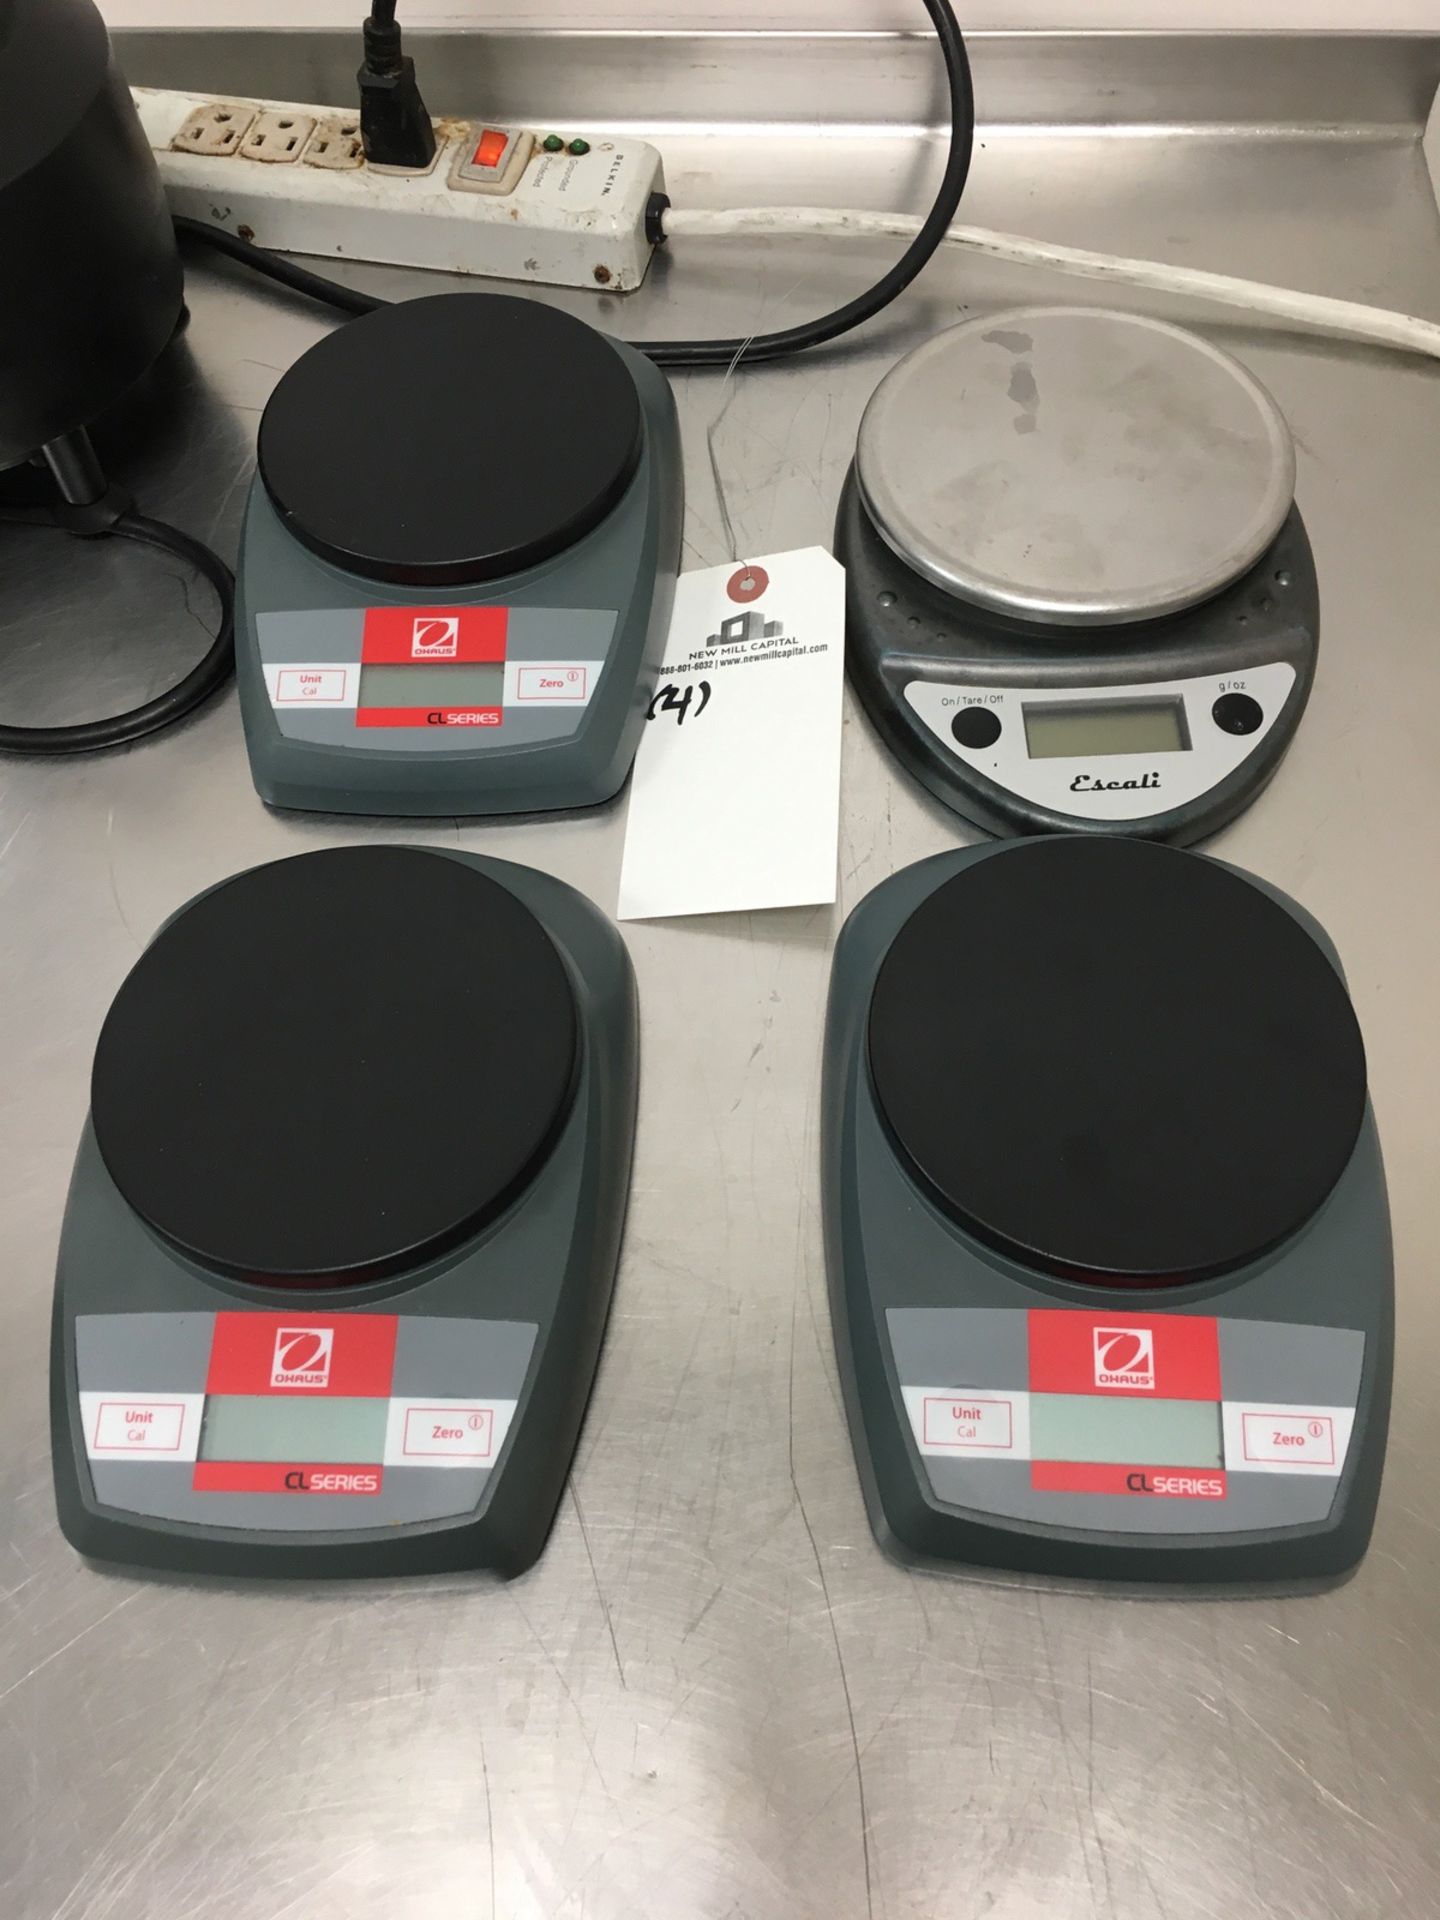 (3) Ohaus CL Series Digital Desktop Scales and (1) Escale Digital Desktop Scale | Rig Fee: No Charge